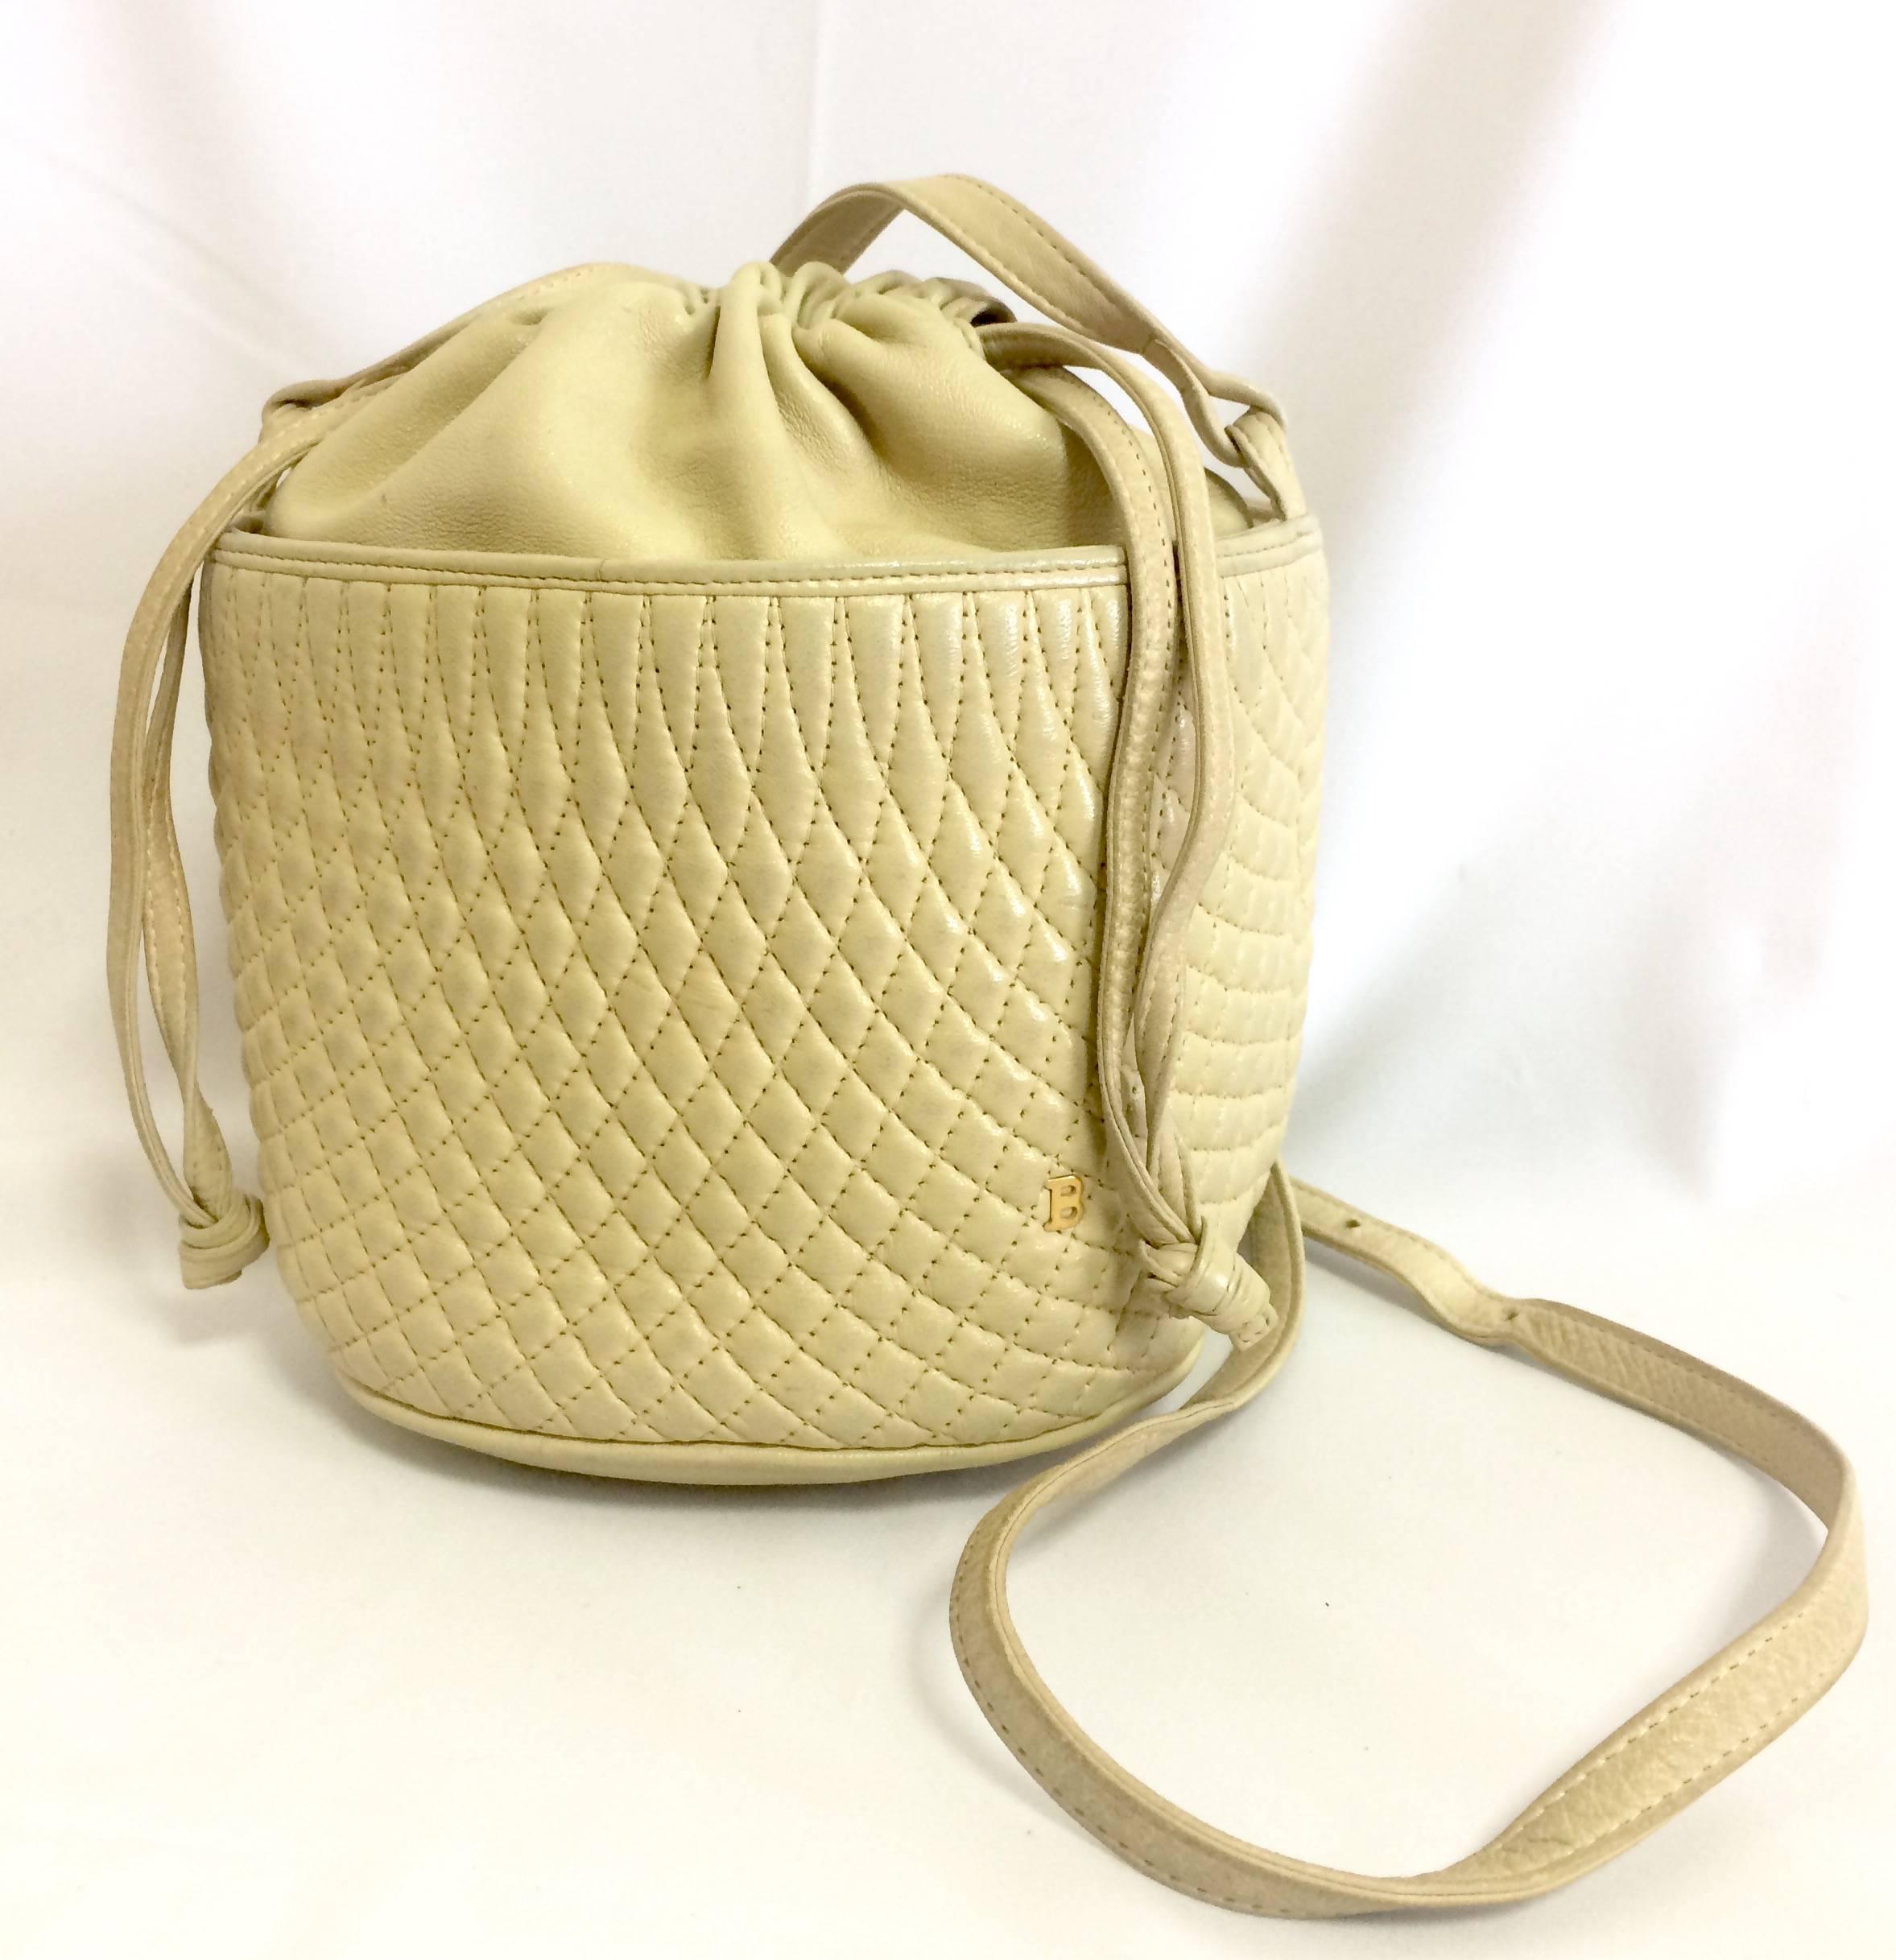 1990s. Vintage BALLY ivory white quilted lambskin mini hobo, bucket shoulder bag with golden B charm and drawstrings.

This is a vintage Bally ivory white genuine lambskin quilted leather mini hobo shoulder bag back in the old Bally collection.
It